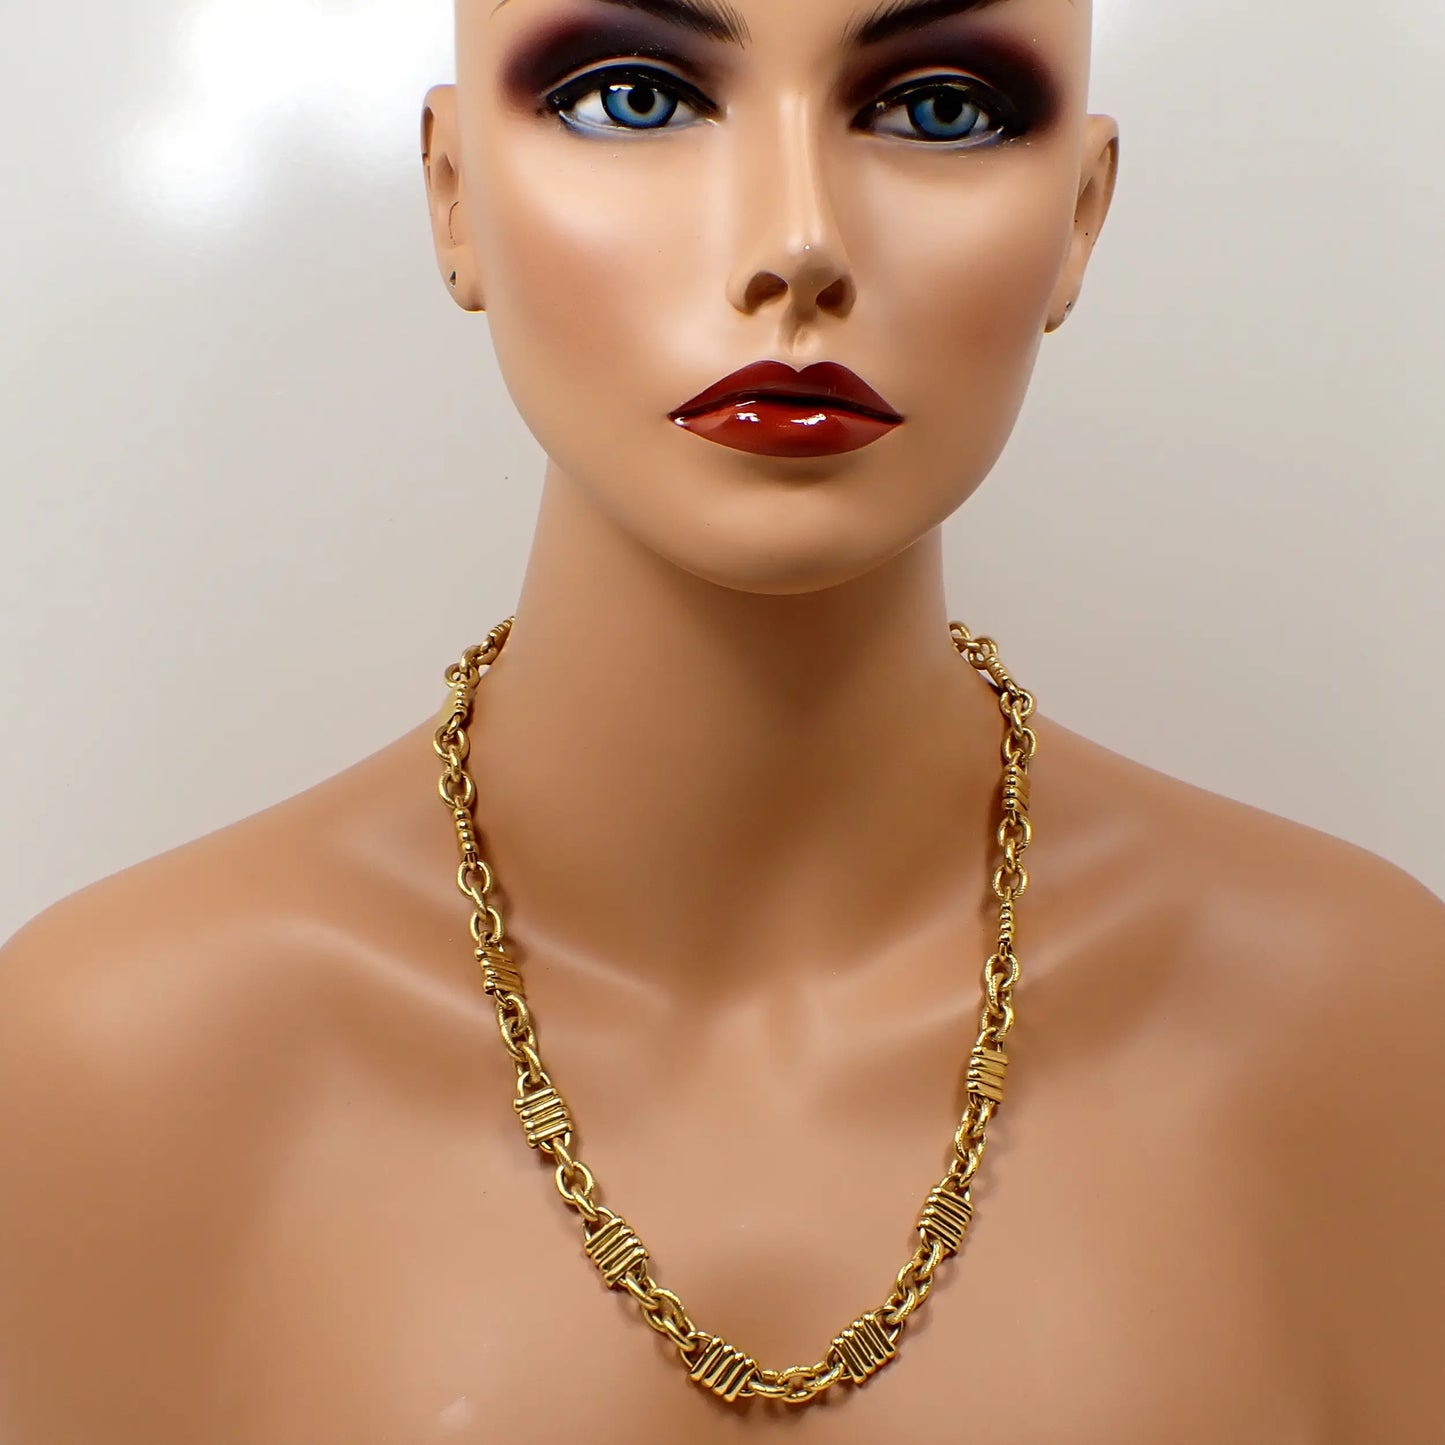 Trifari Heavy Fancy Link Retro Vintage Chain Necklace, Gold Tone Plated